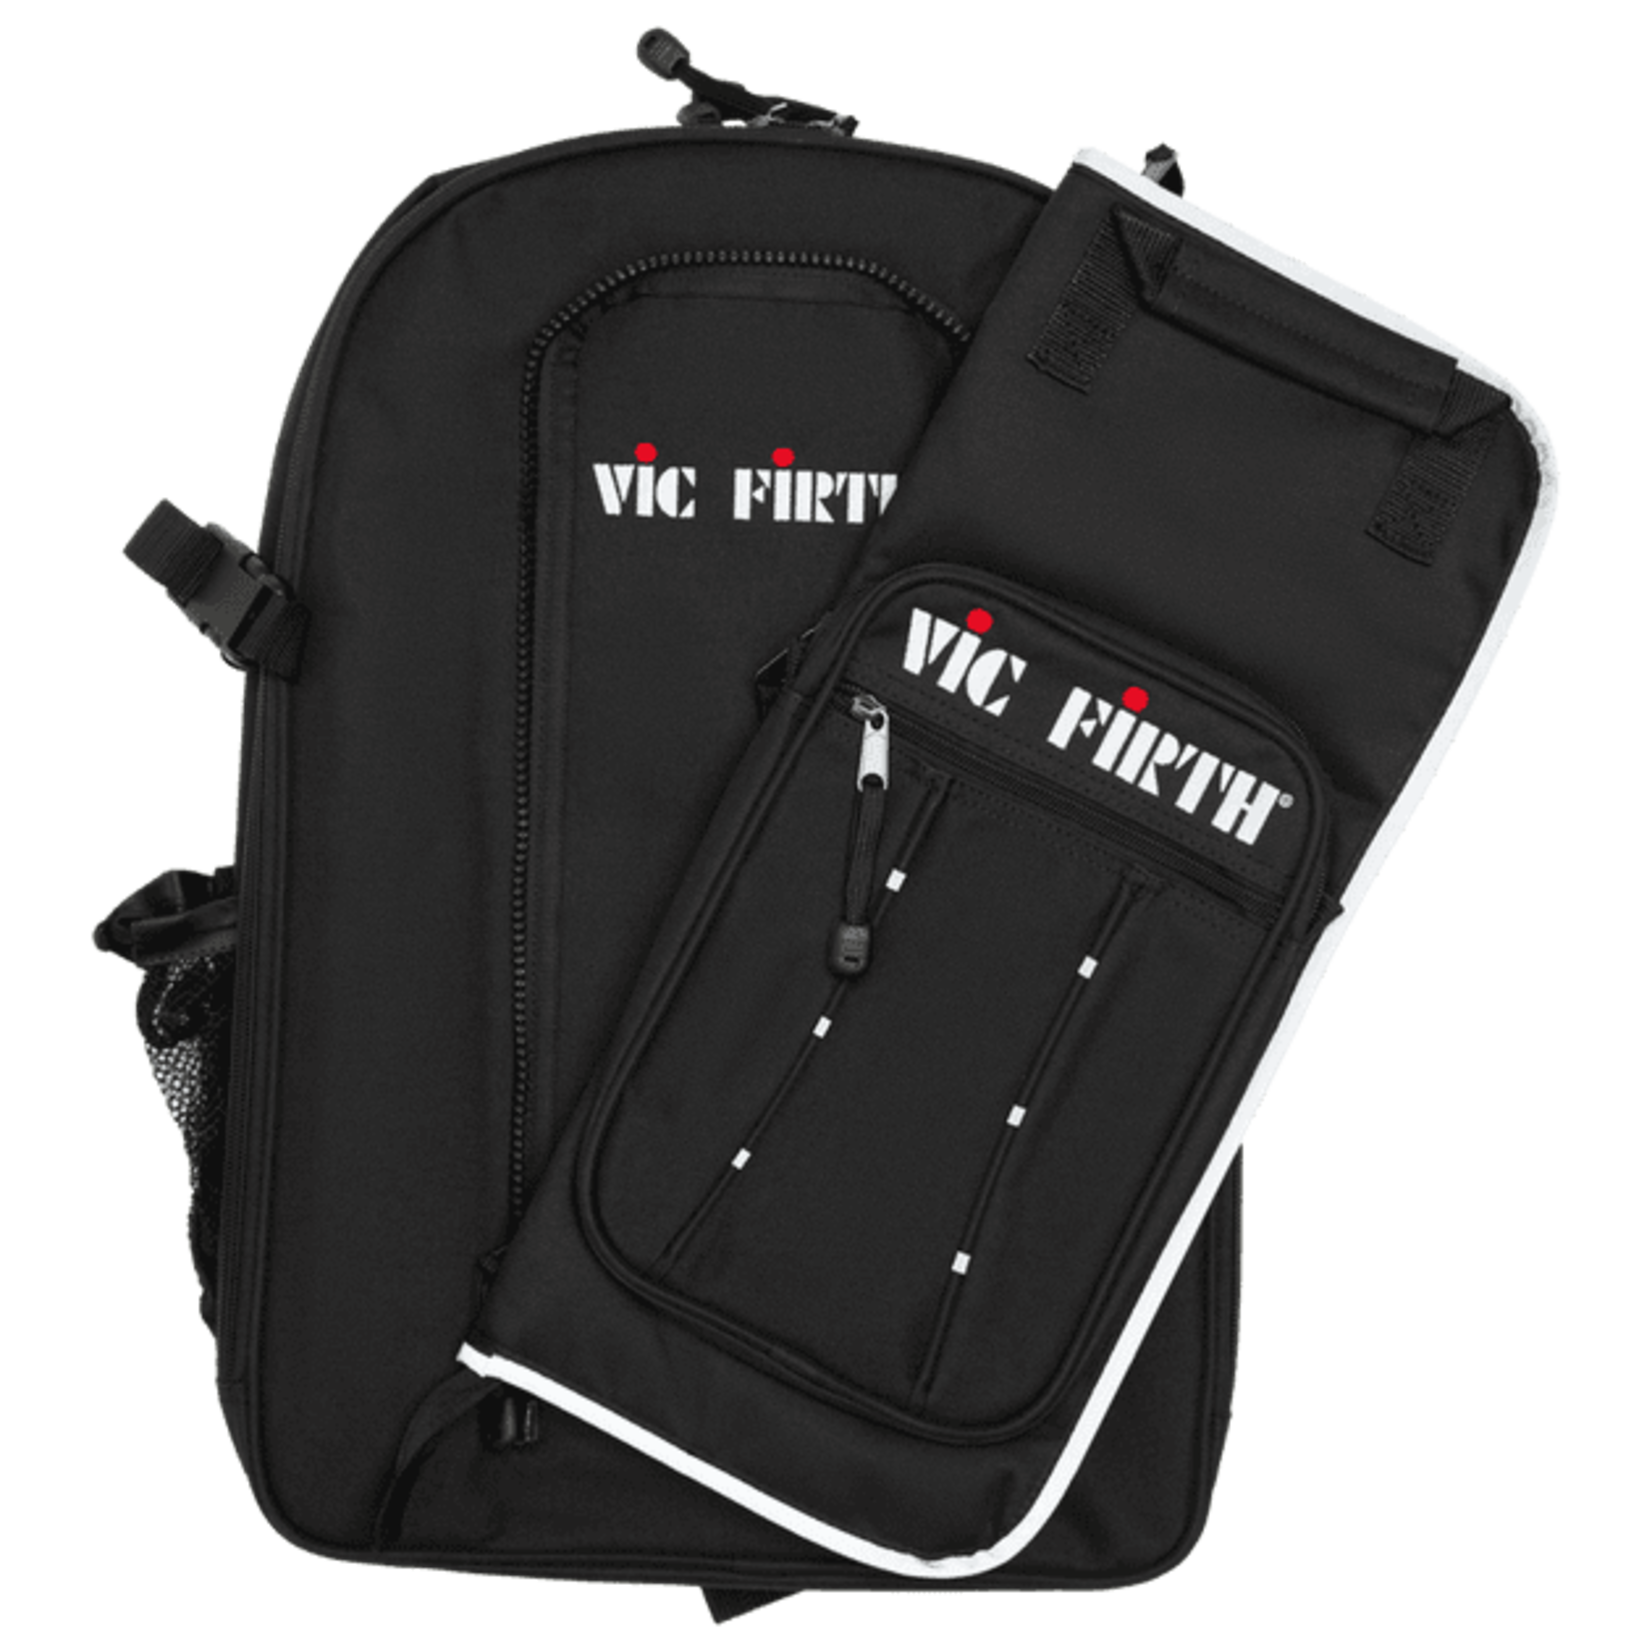 Vic Firth Vic Firth "Vicpack" Backpack